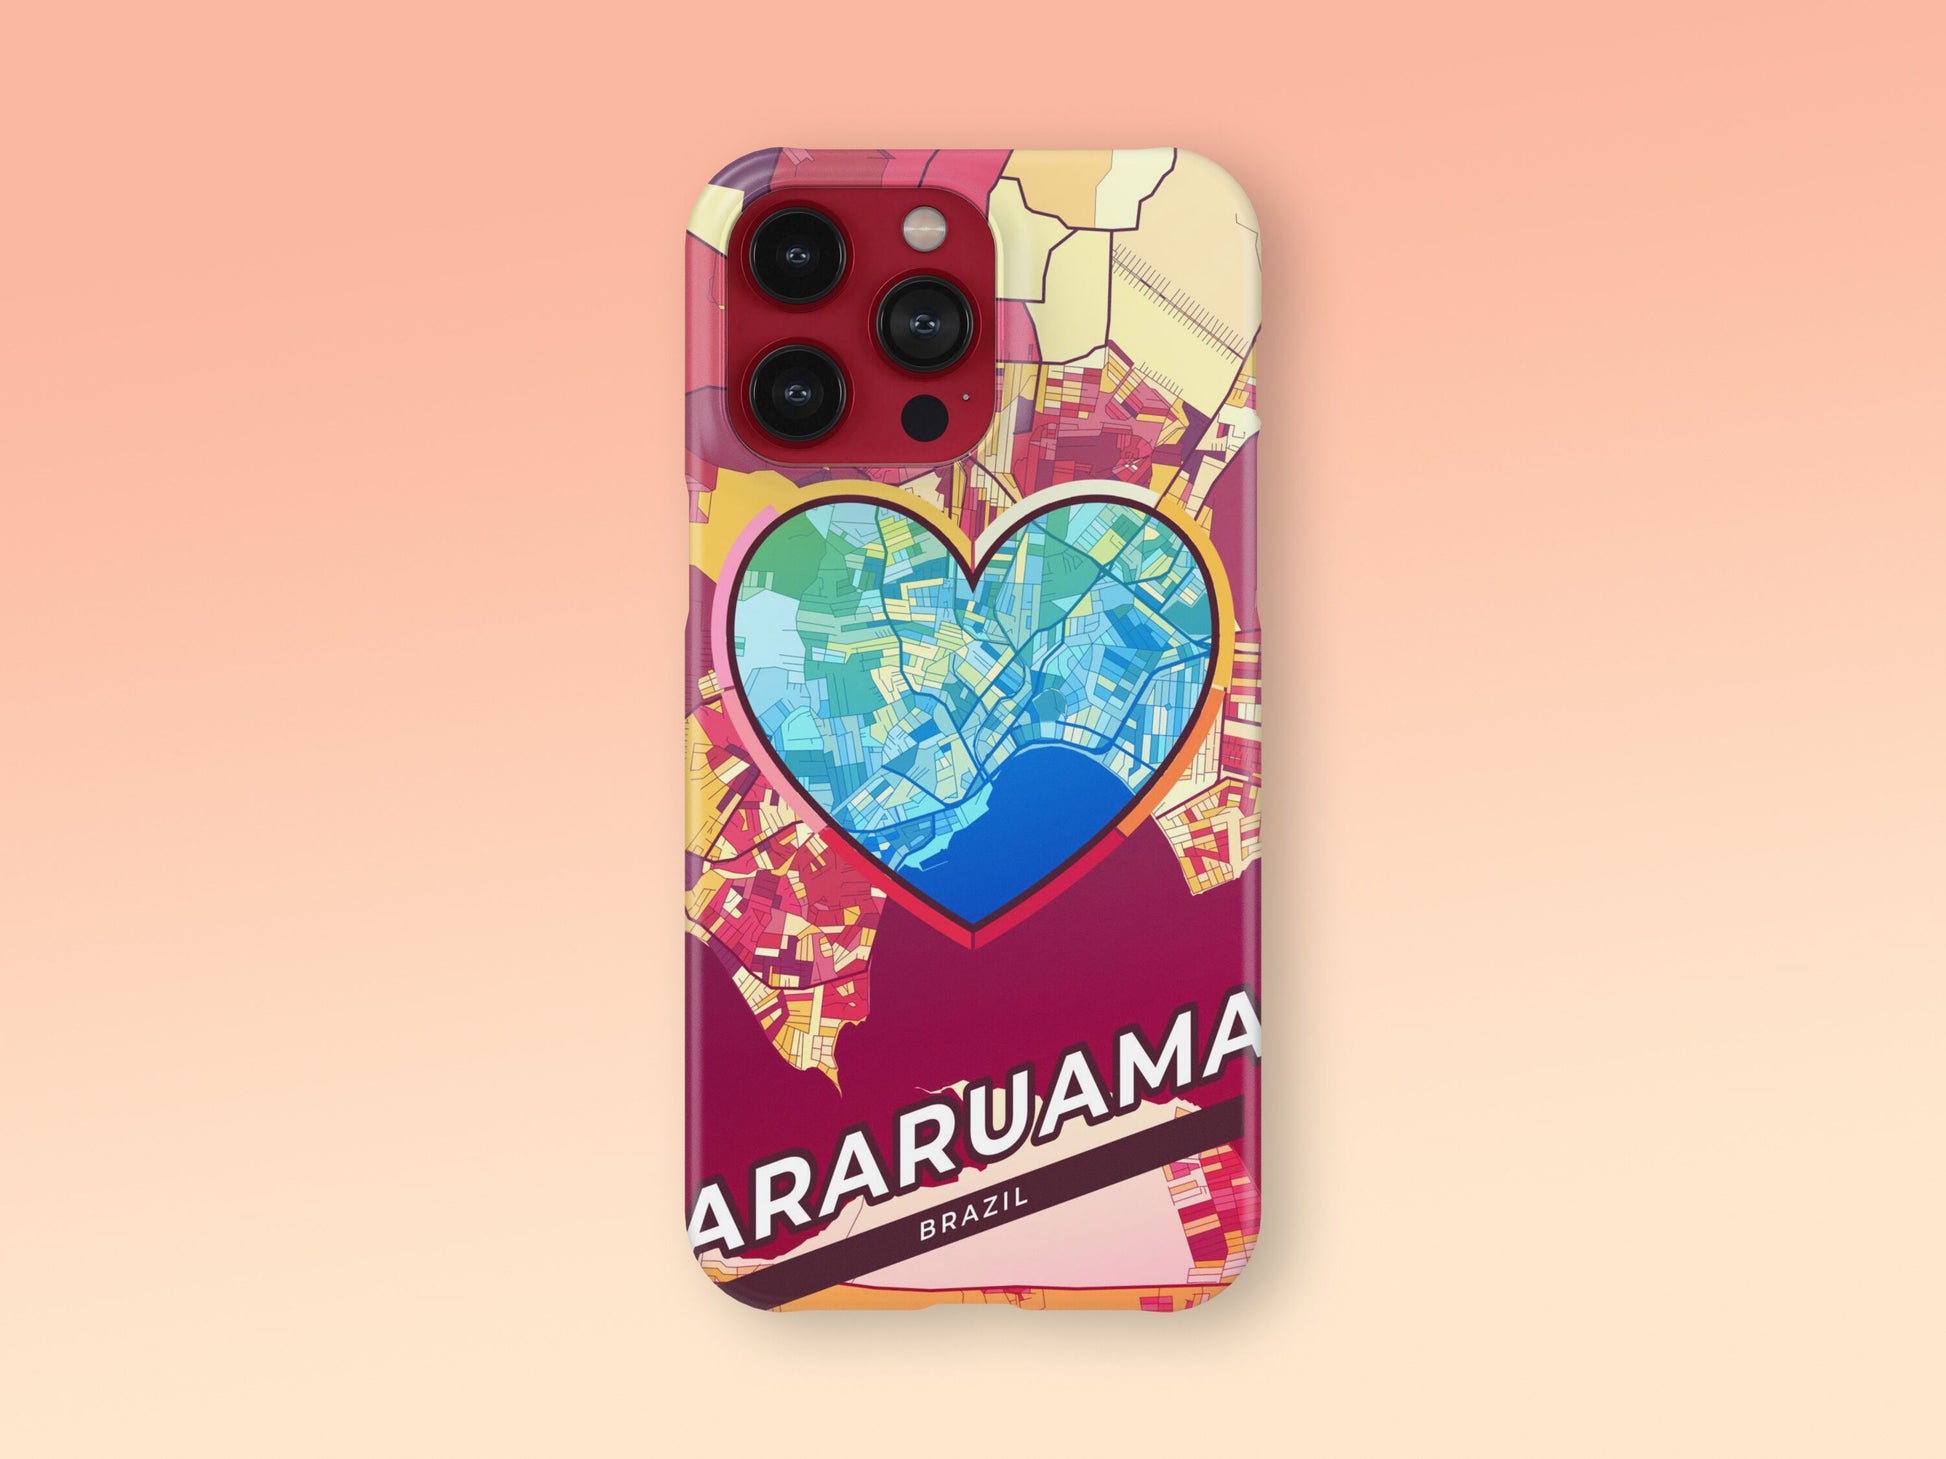 Araruama Brazil slim phone case with colorful icon. Birthday, wedding or housewarming gift. Couple match cases. 2